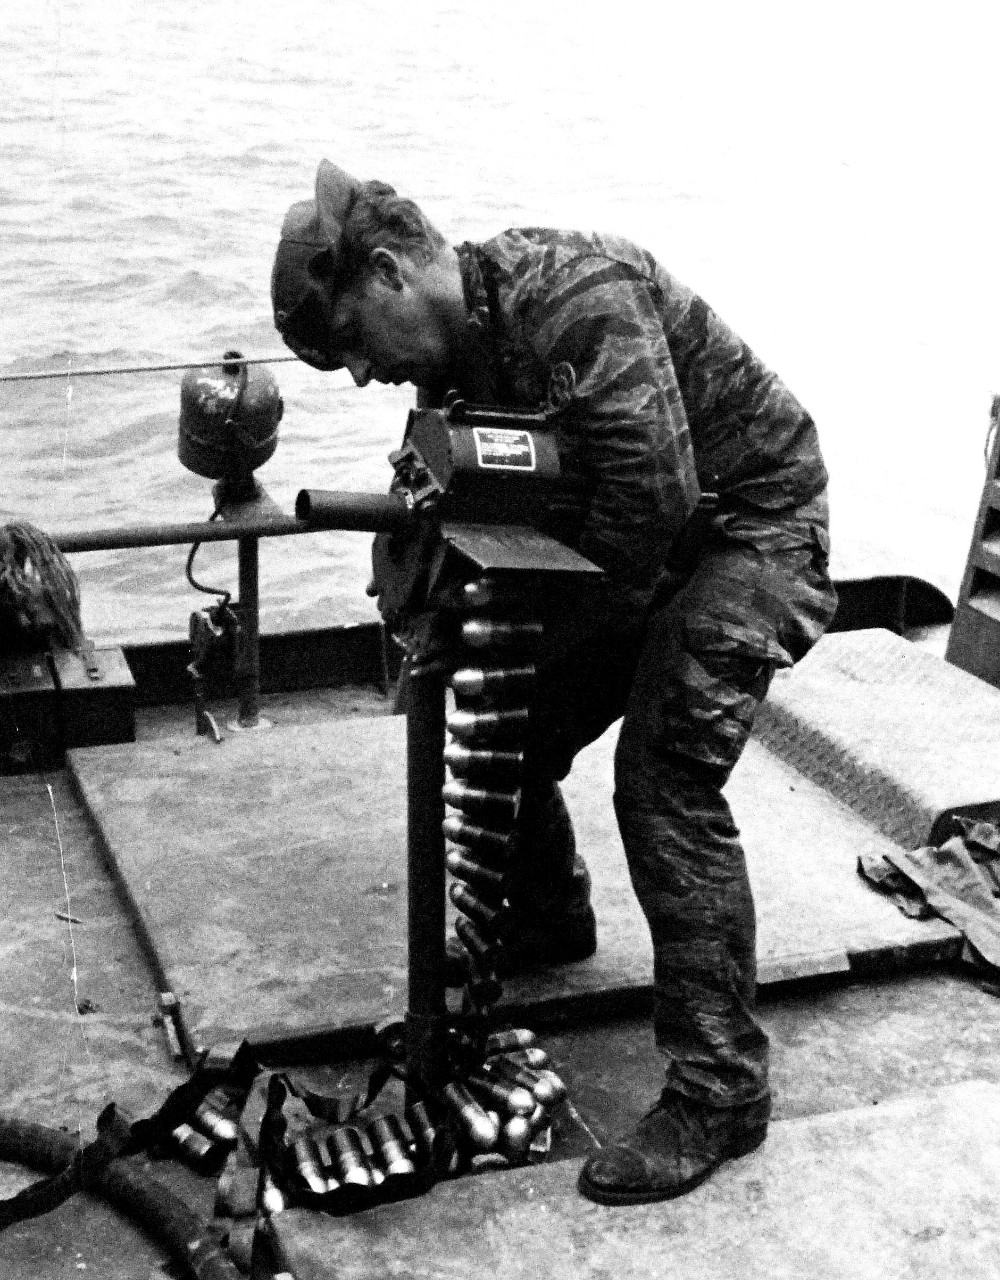 428-GX-USN 1139106:  Patrol Craft Fast (PCF), April 1969.    A U.S. Navy Inshore Patrol (PCF) crewman readies his Mk 18 Mod 0 Manual 40 mm grenade launcher for action during a patrol on the Ca Mau Peninsula River, Republic of Vietnam.  Photographed by PHC A.R. Hill, April 1969.  Official U.S. Navy photograph, now in the collections of the National Archives. 